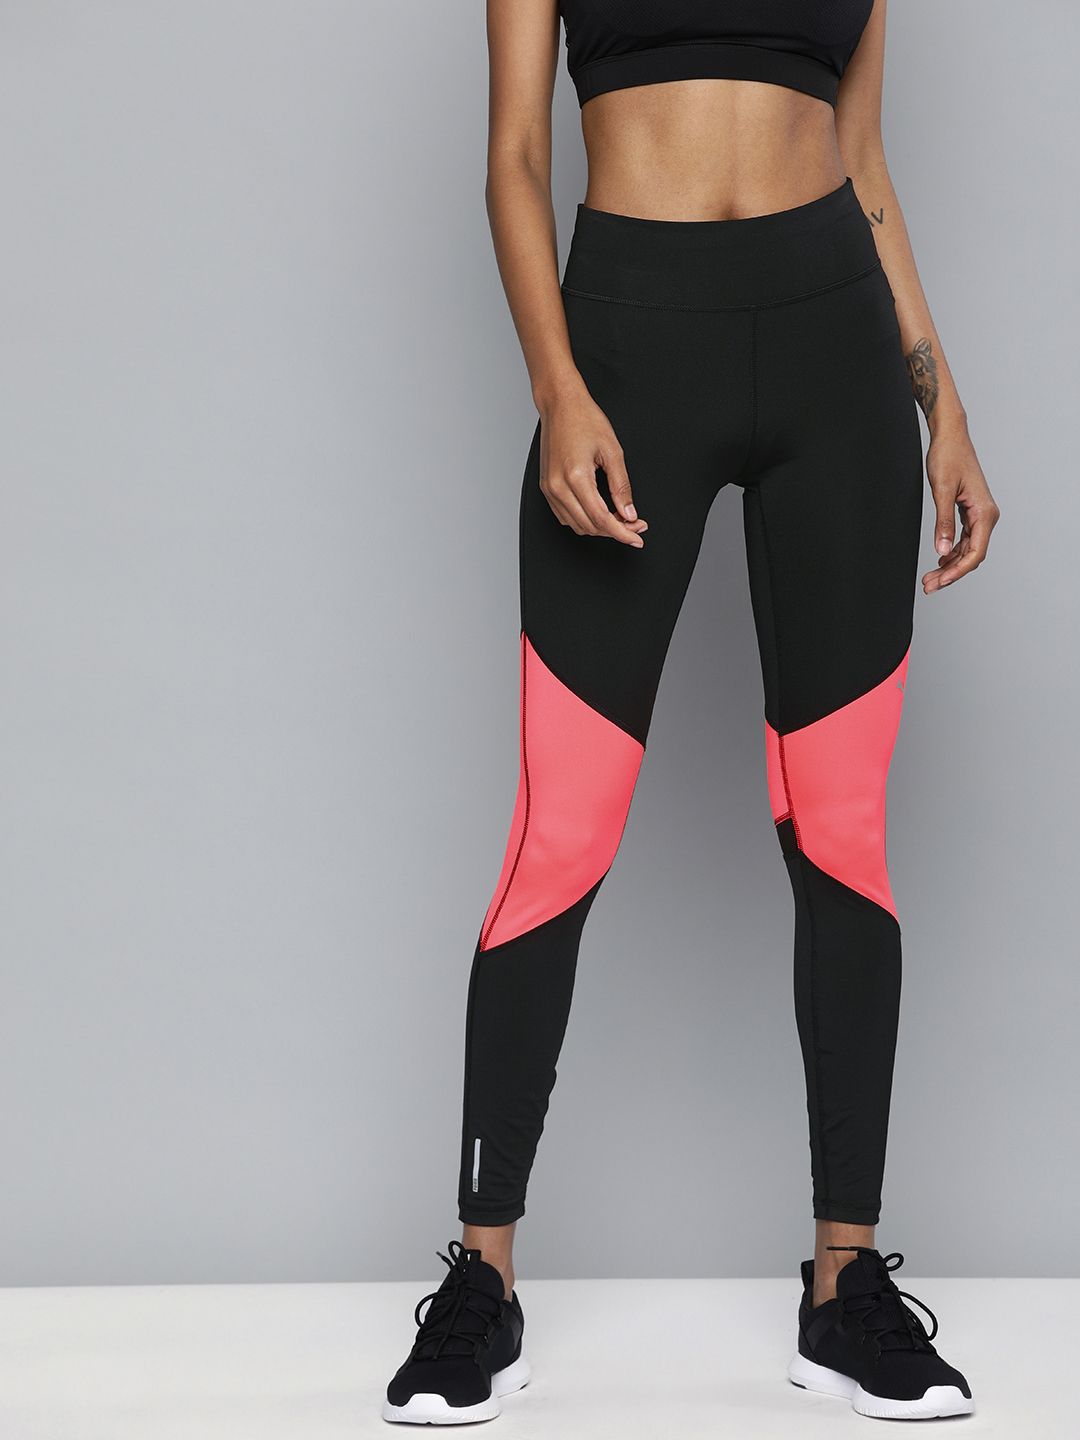 Puma Women Black & Pink Colorblocked Ignite DRY-CELL Full Tights Price in India